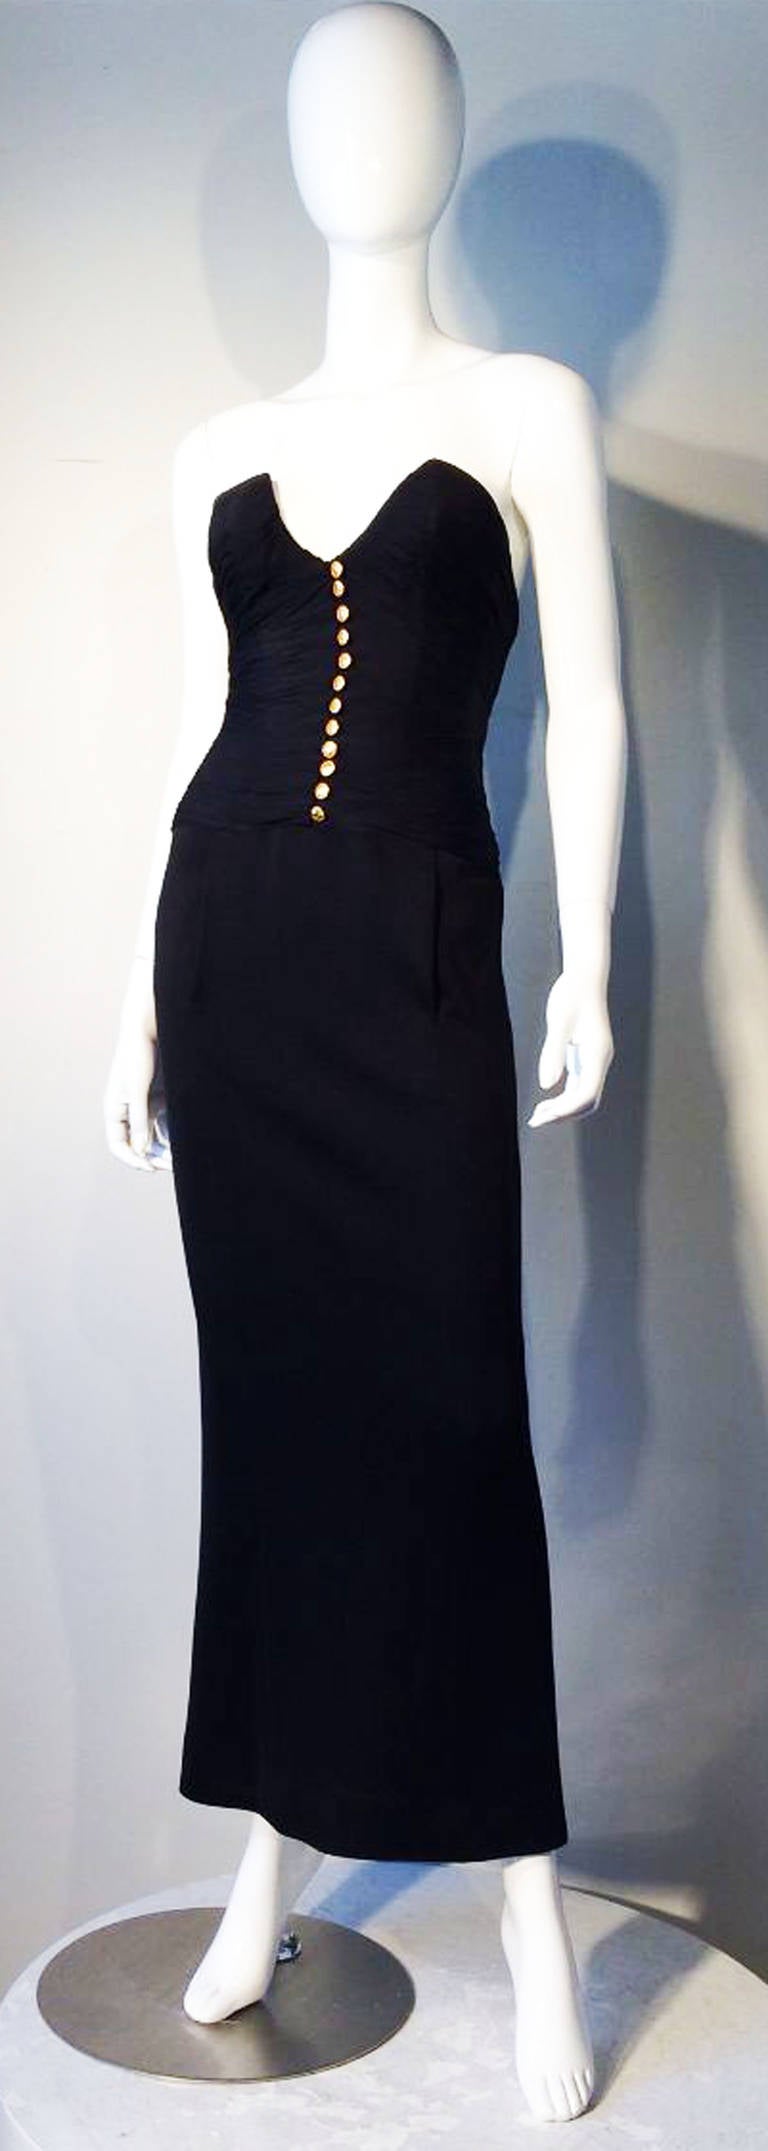 A fine and rare vintage Chanel strapless body conscience gown. Ruched silk chiffon bodice features decorative gilt logo buttons front center and matching jet black double knit floor length skirt. Item fully lined and zips up back. Pristine appears